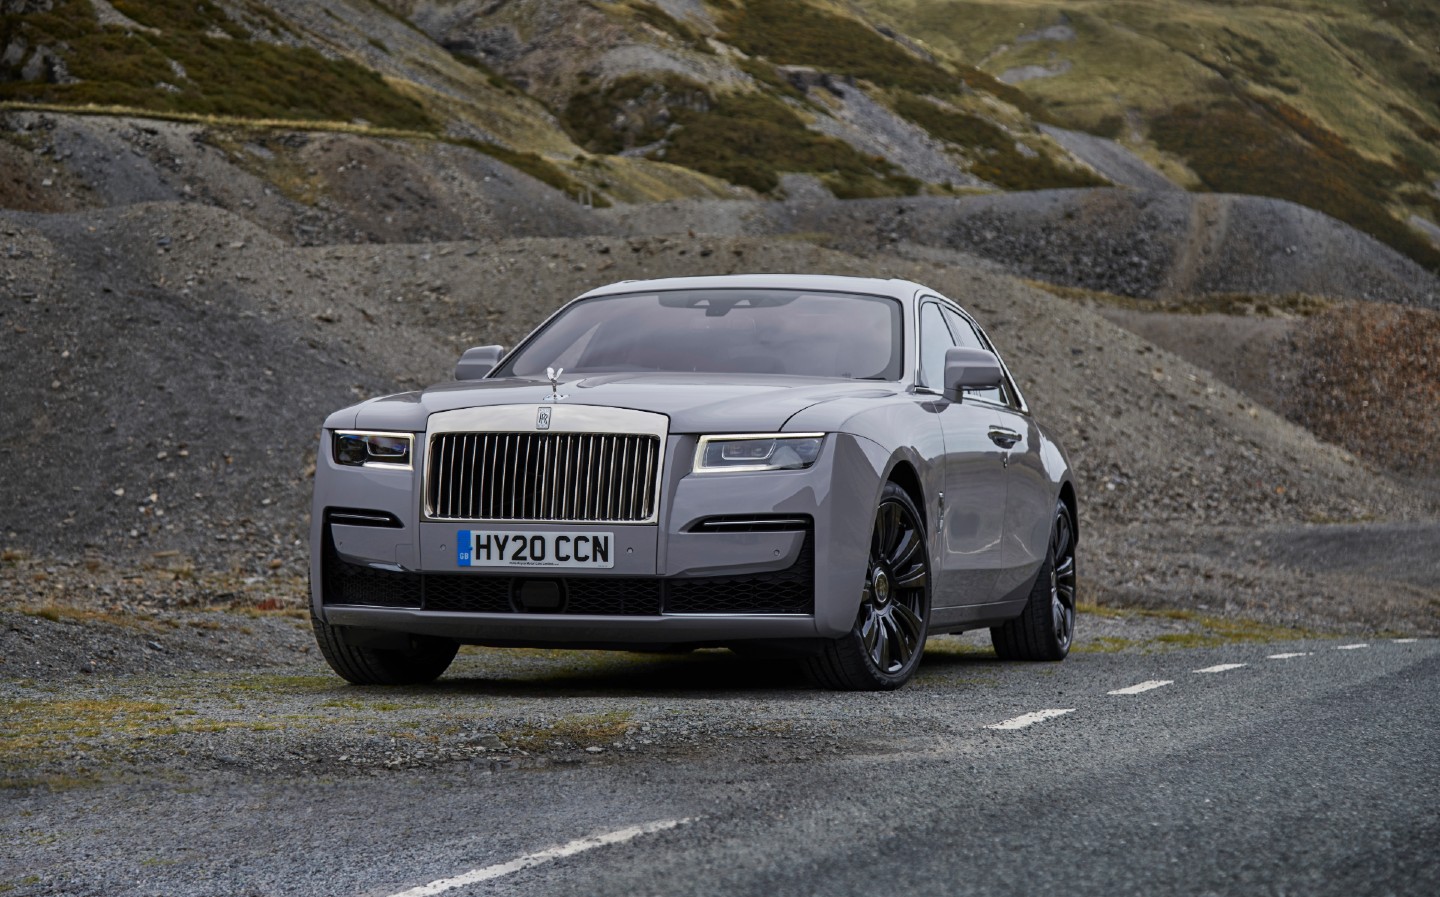 Whats the Fastest RollsRoyce Vehicle